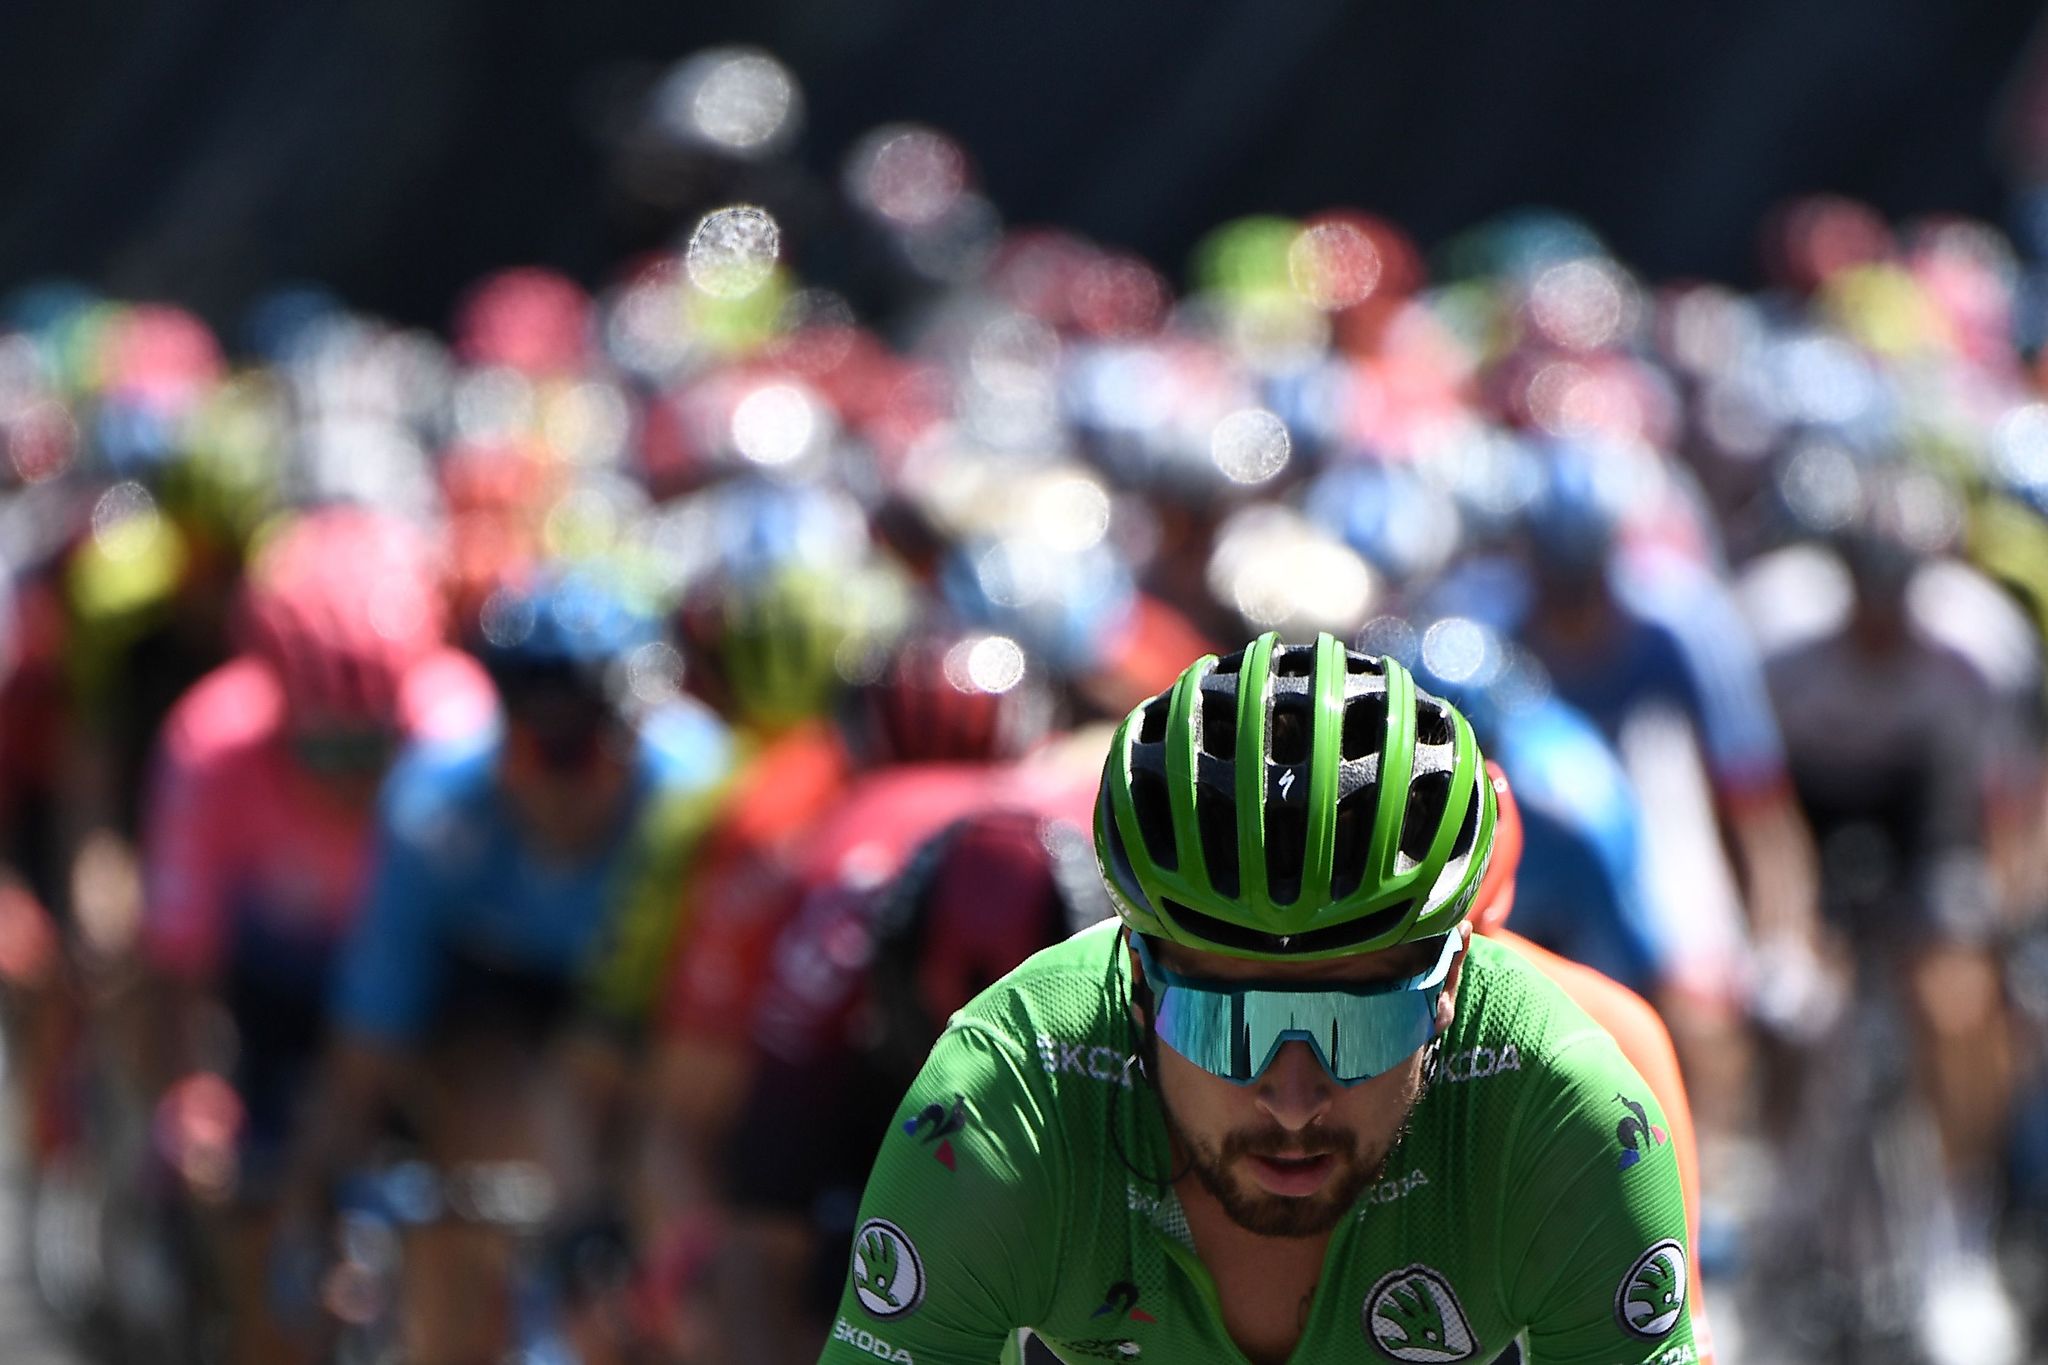 (FILES) In this file photo taken on July 25, 2019 Slovakias lt;HIT gt;Peter lt;/HIT gt; lt;HIT gt;Sagan lt;/HIT gt;, wearing the best sprinters green jersey leads the race during the eighteenth stage of the 106th edition of the Tour de France cycling race between Embrun and Valloire, in Valloire. - The Tour de France is not only a French monument, but also the economic heartbeat of professional cycling itself and analysts fear heavy consequences if the coronavirus crisis forces its cancellation. An announcement is expected this week on either a postponement or an outright cancellation of the 21-day extravaganza that is currently scheduled to start in Nice on June 27. (Photo by JEFF PACHOUD / AFP)